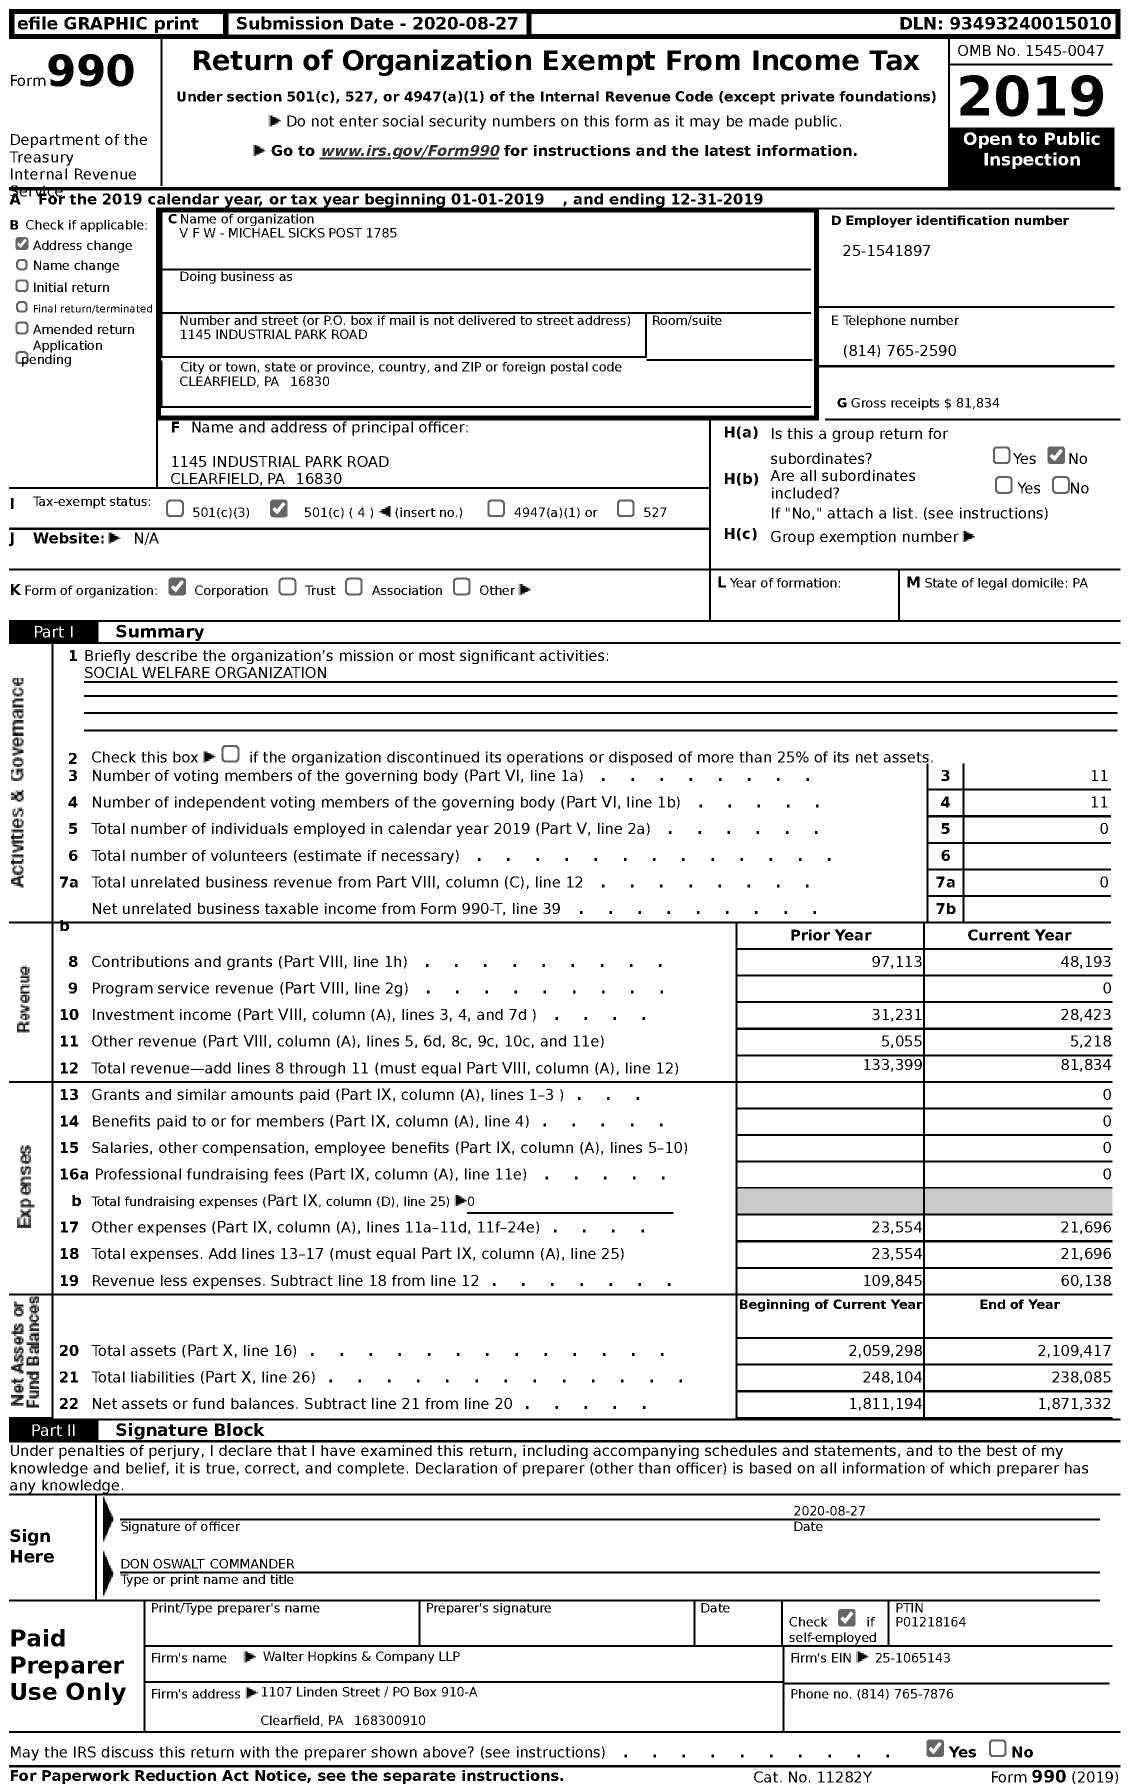 Image of first page of 2019 Form 990 for VFW Department of Pennsylvania - 1785 F Michael Sicks Post